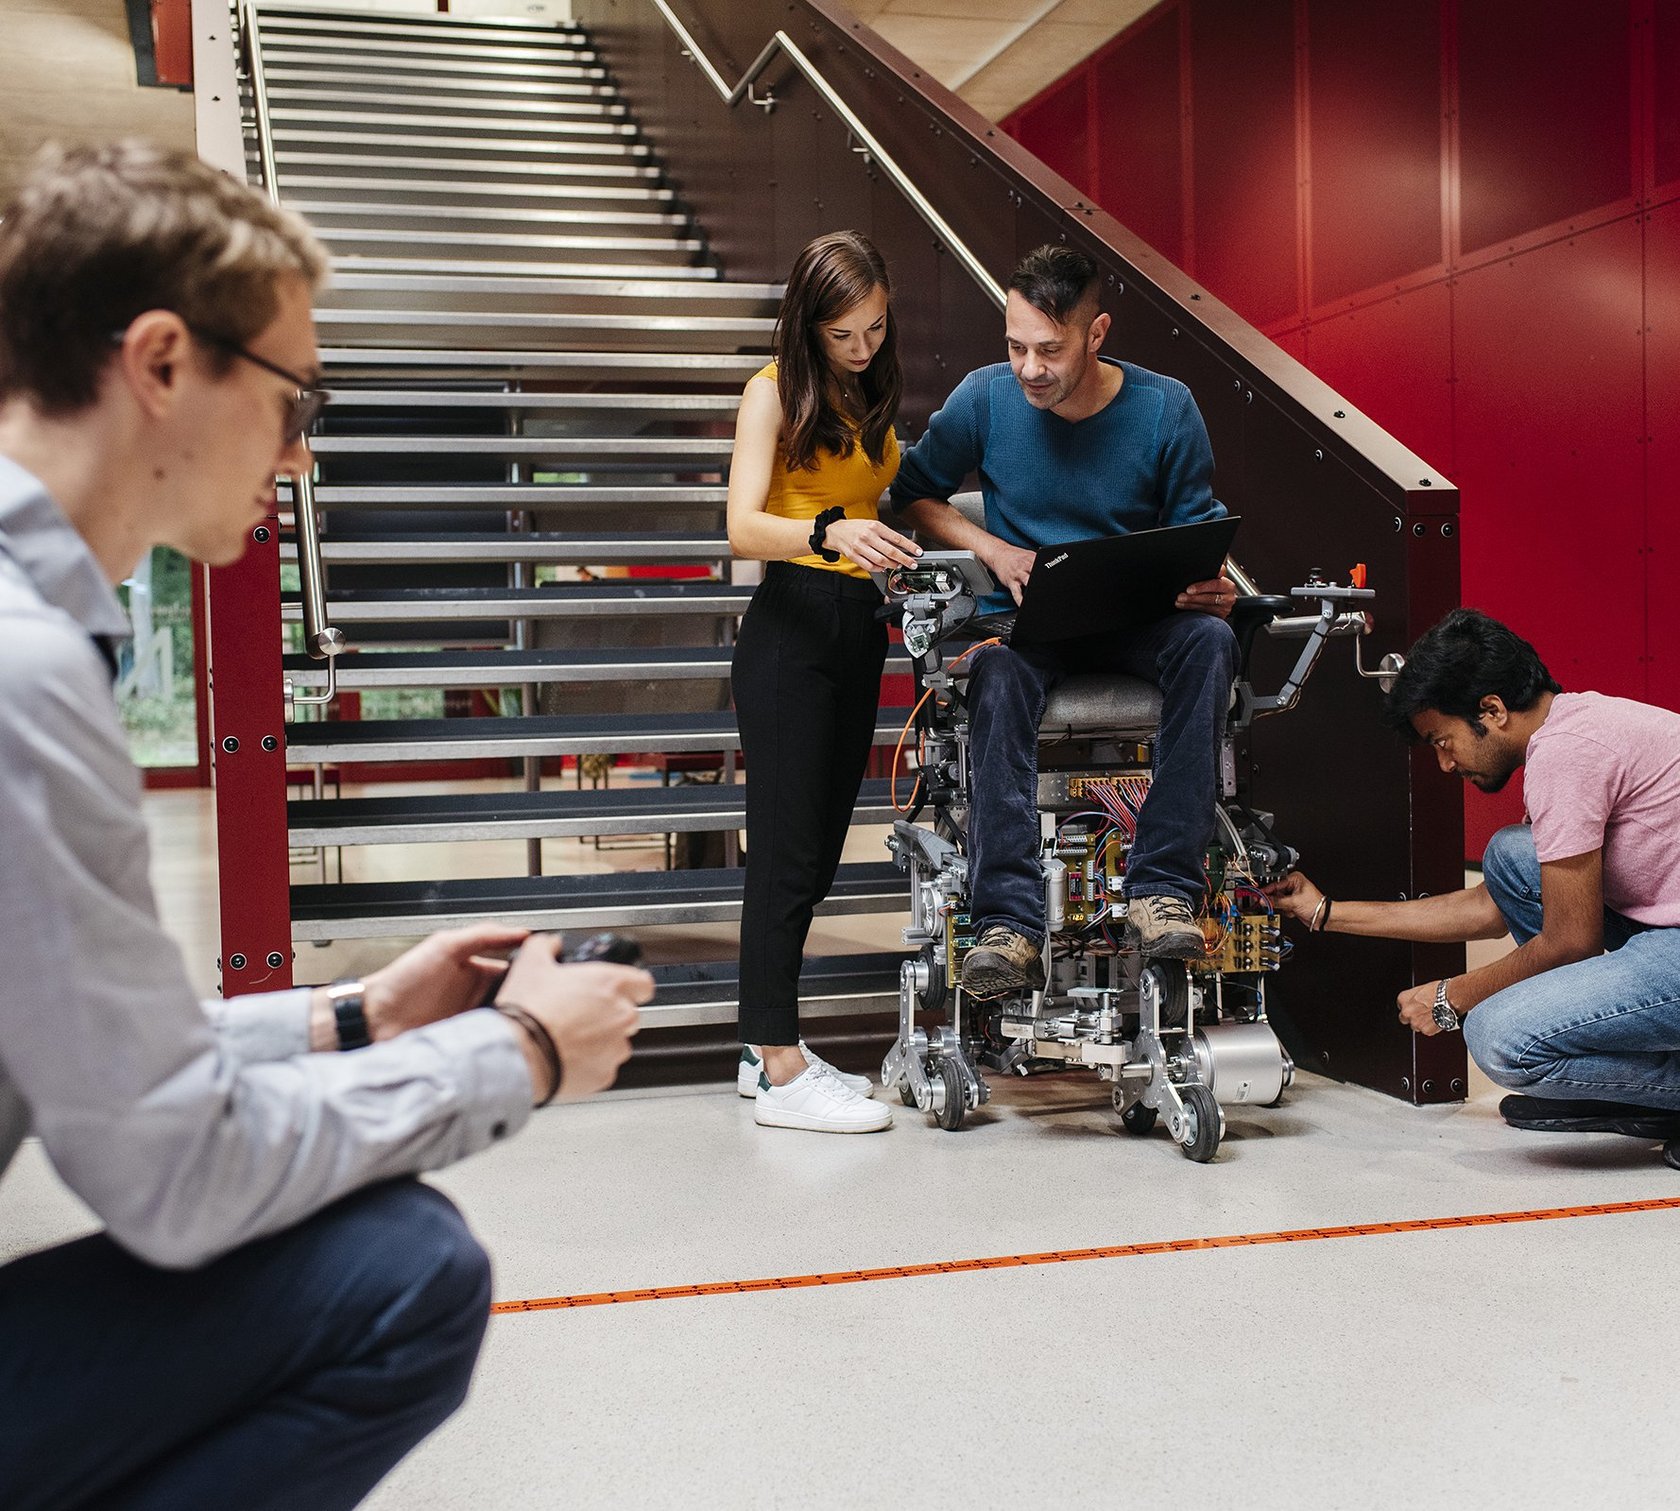 a student team uses the stairs at building N to try out a stair-climbing robot